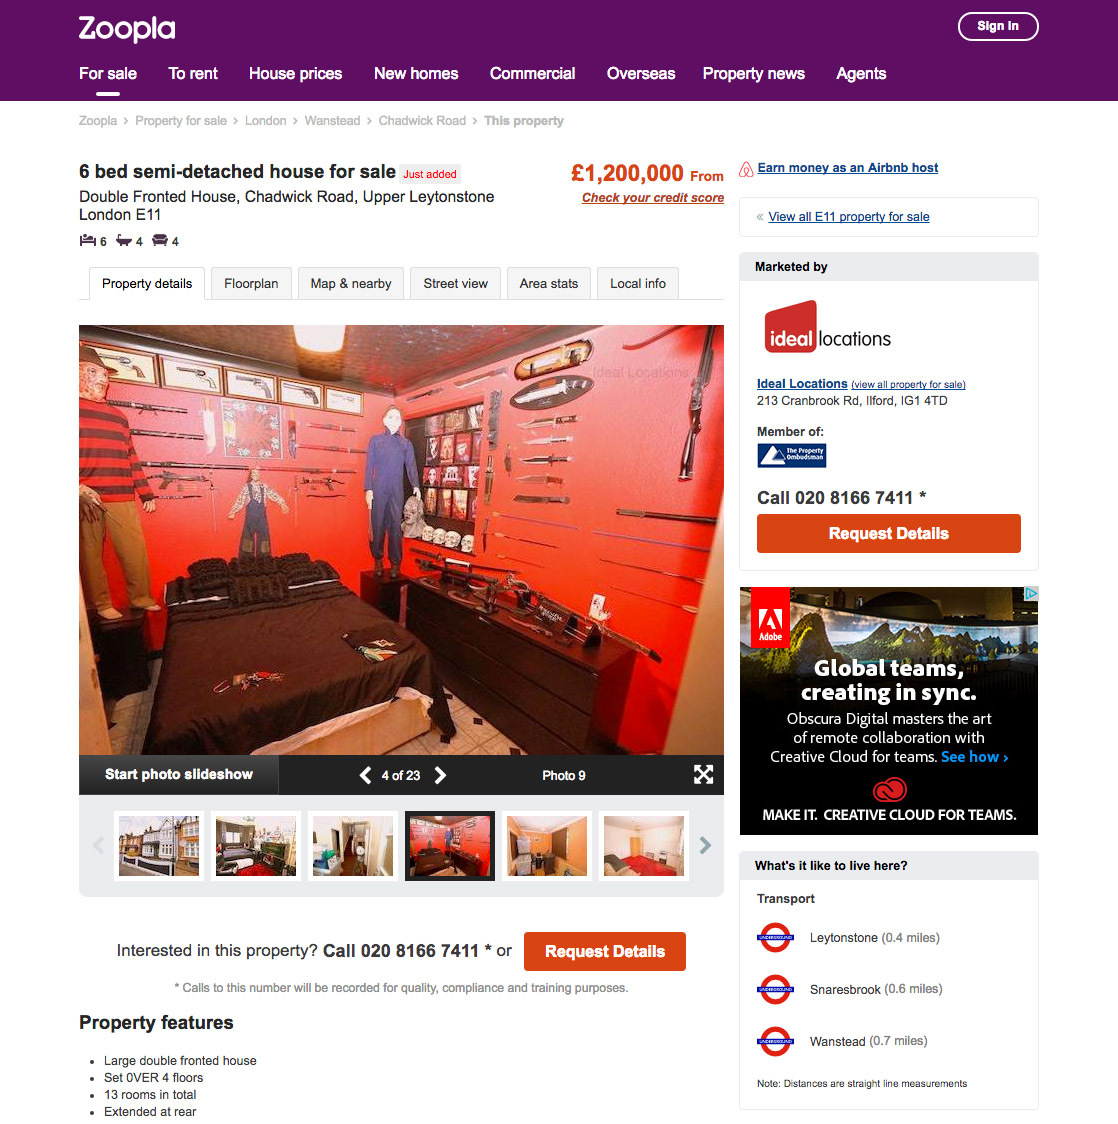 Zoopla on Sept. 9, 2016.